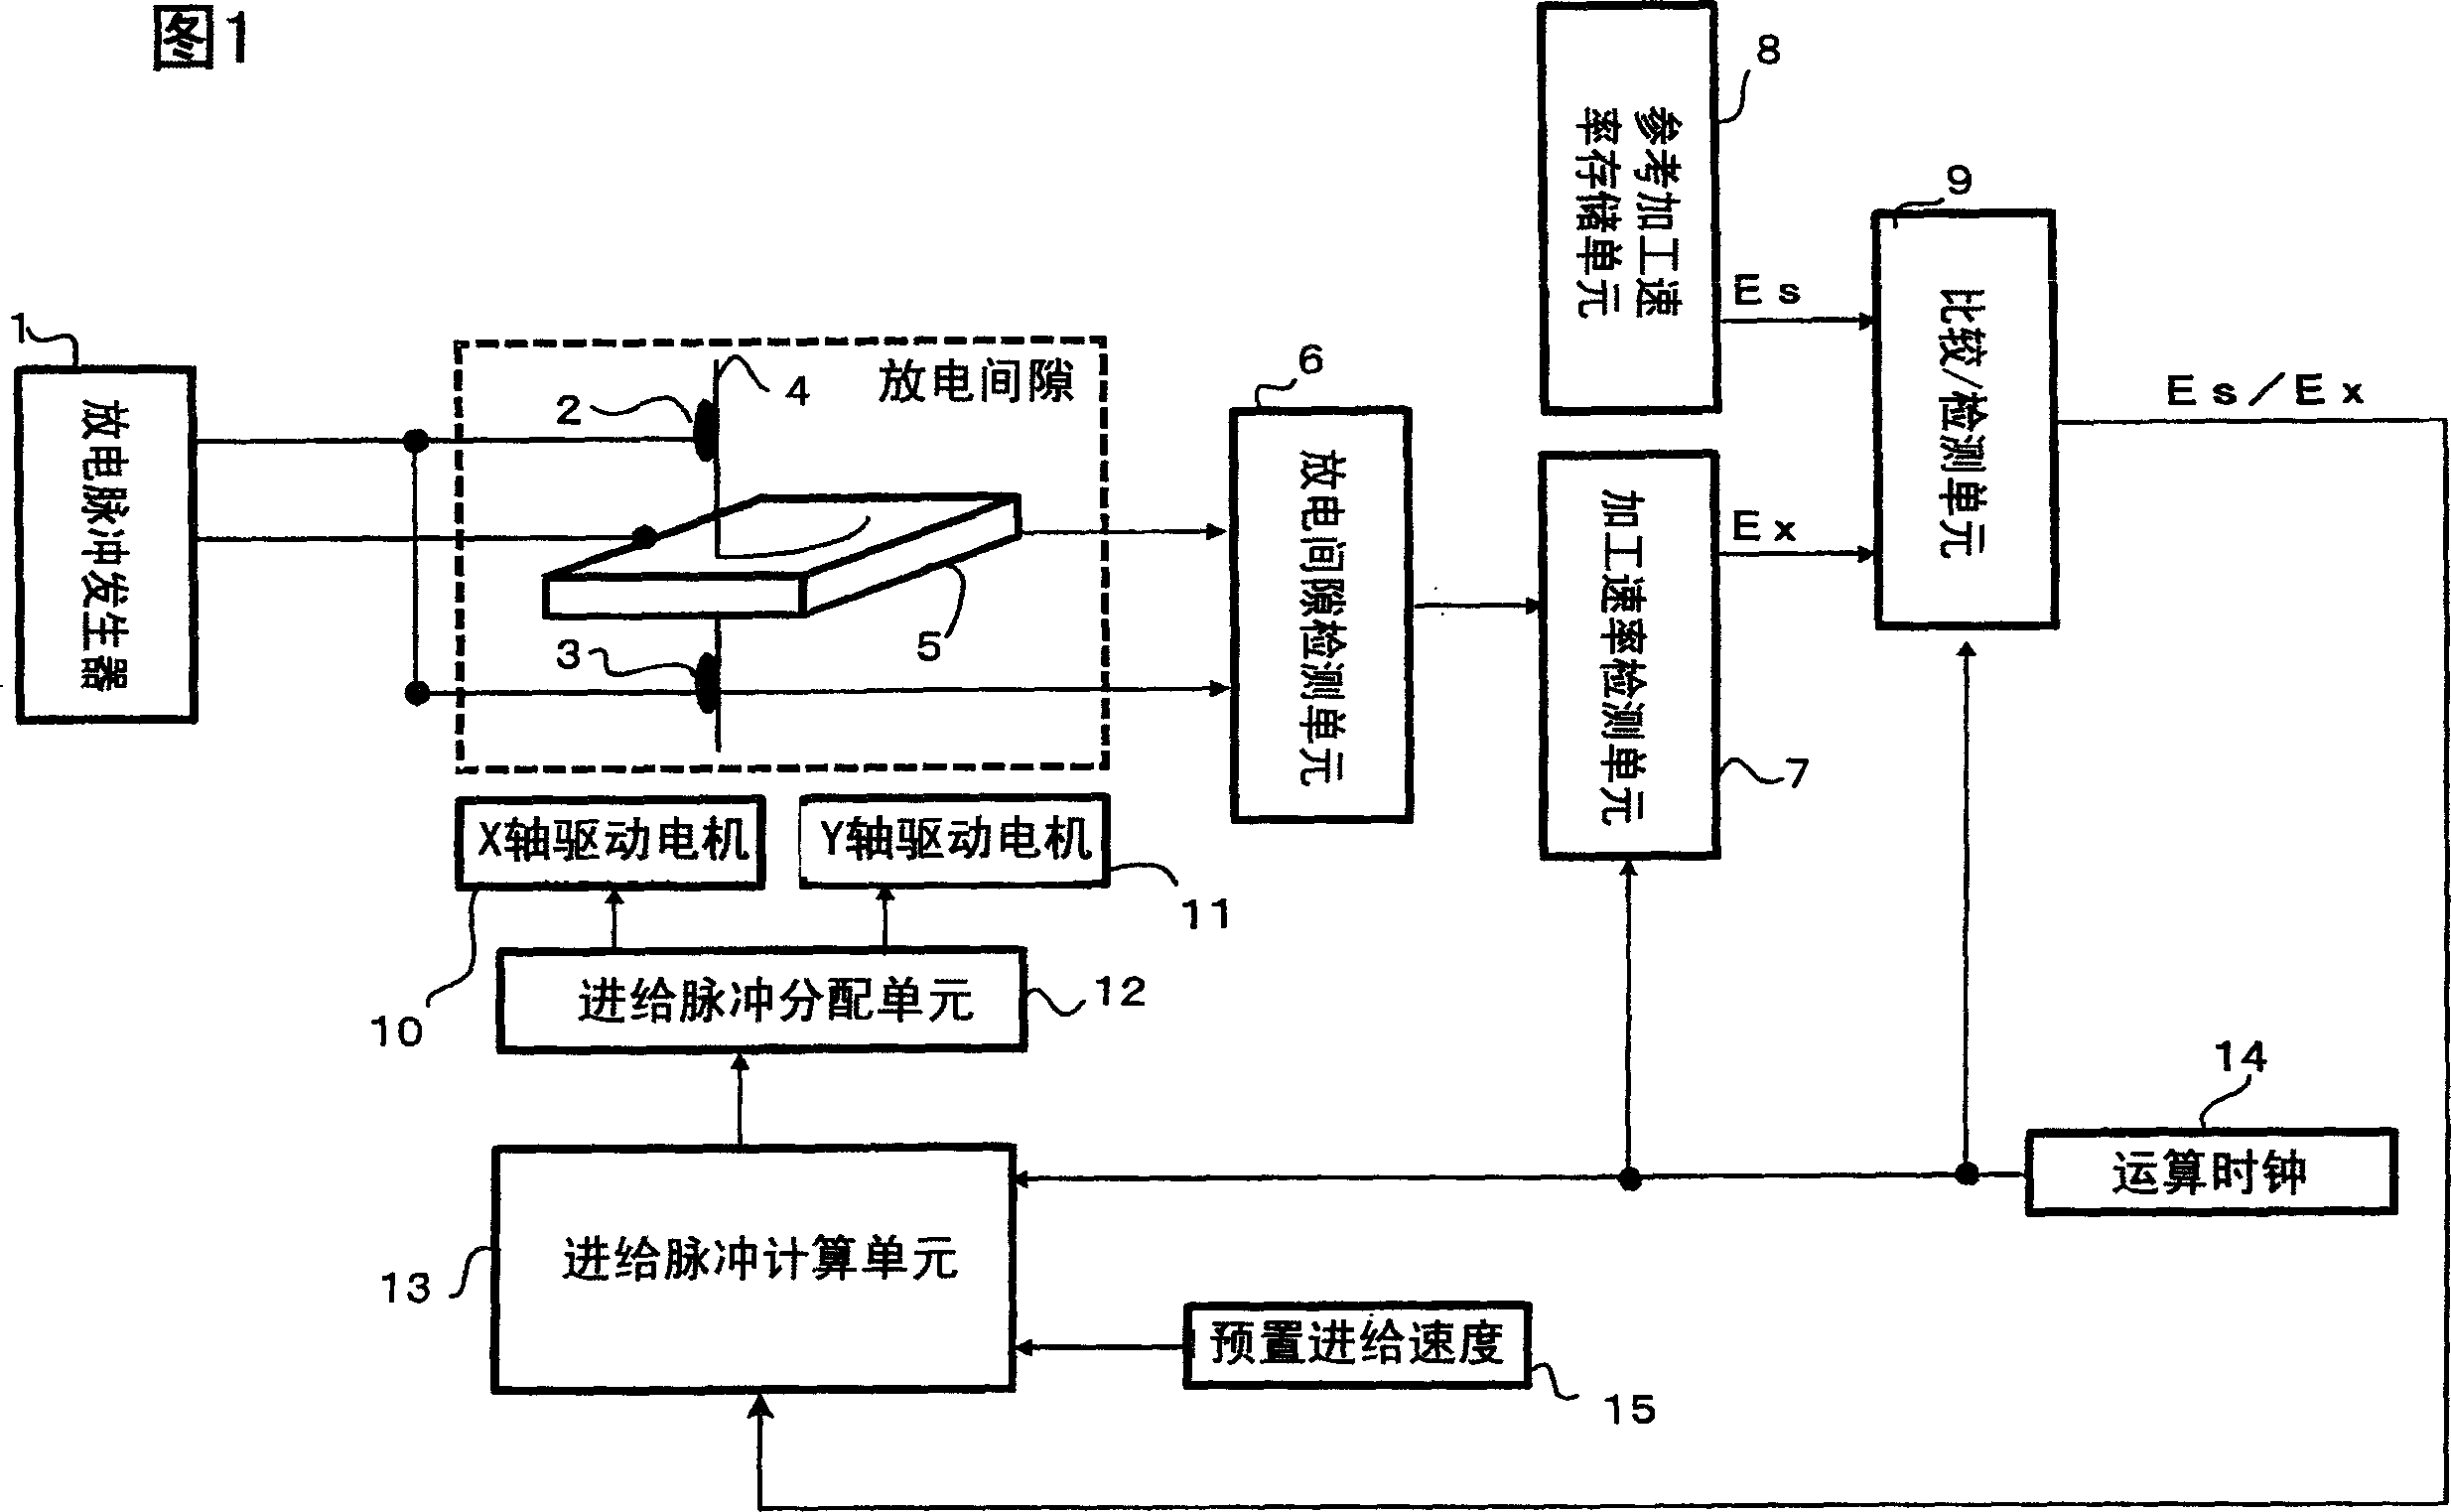 Controller for electric spark line processing machine tool